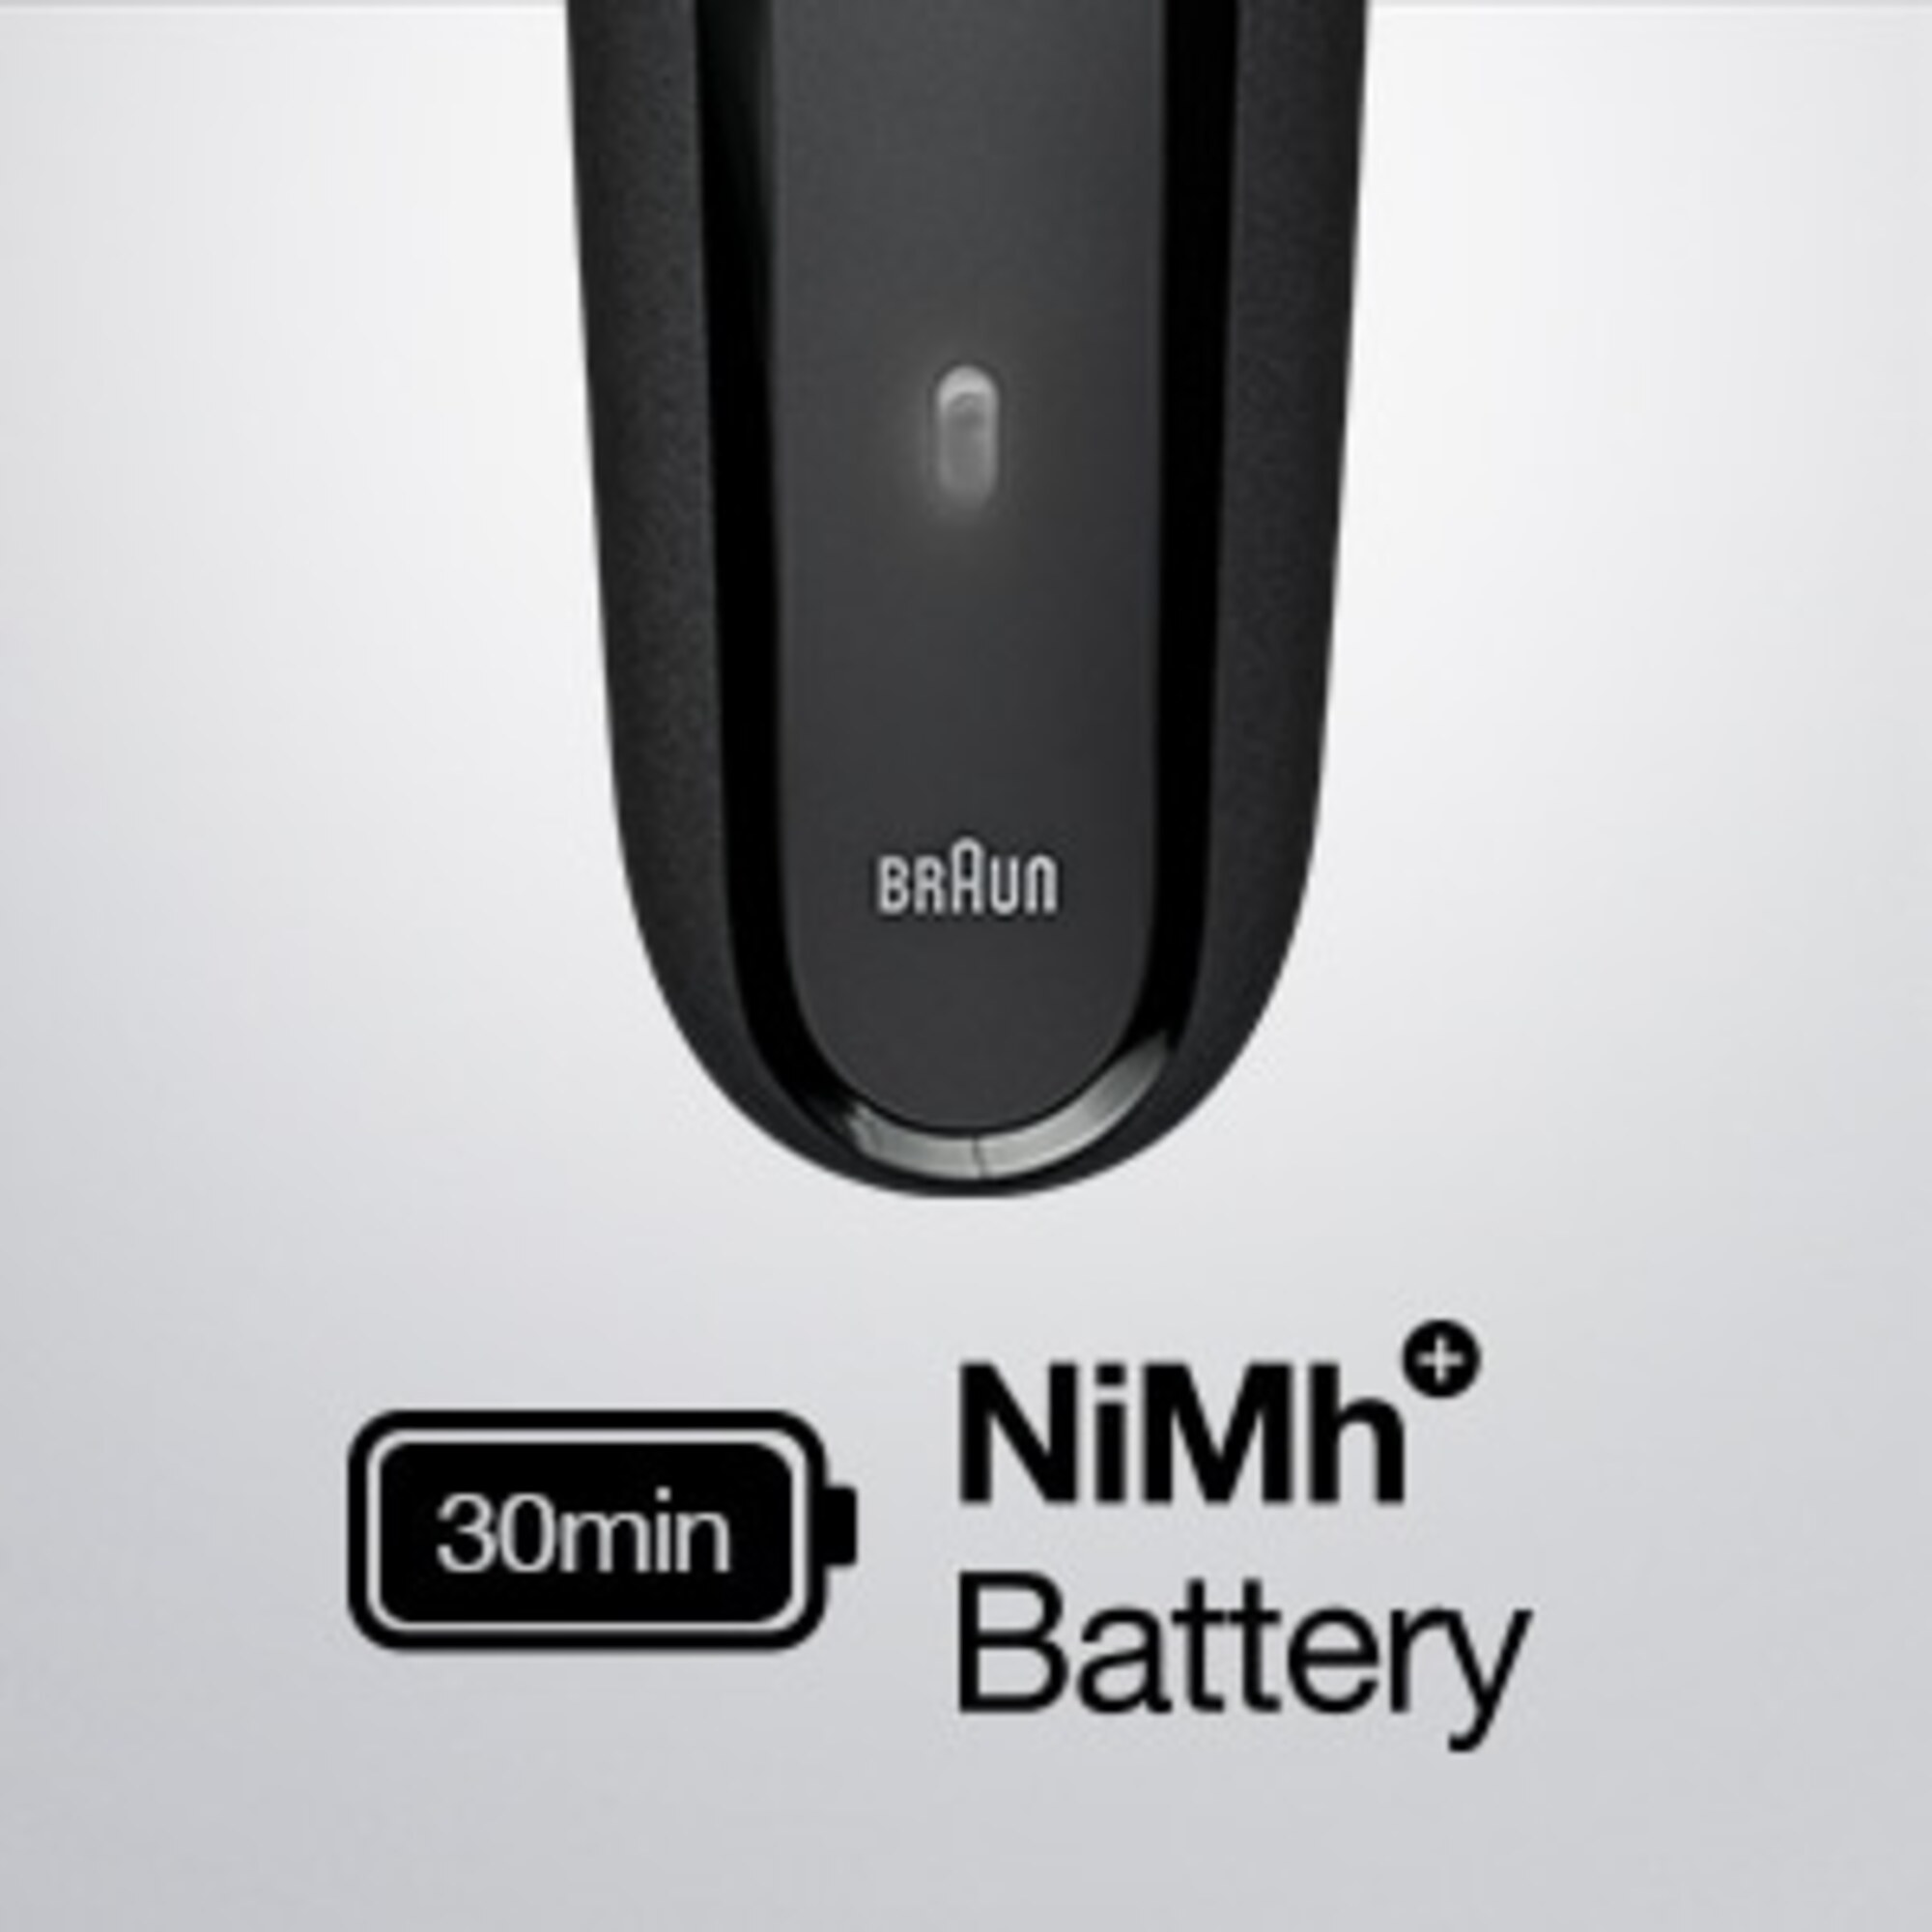 Rechargeable Ni-Mh battery